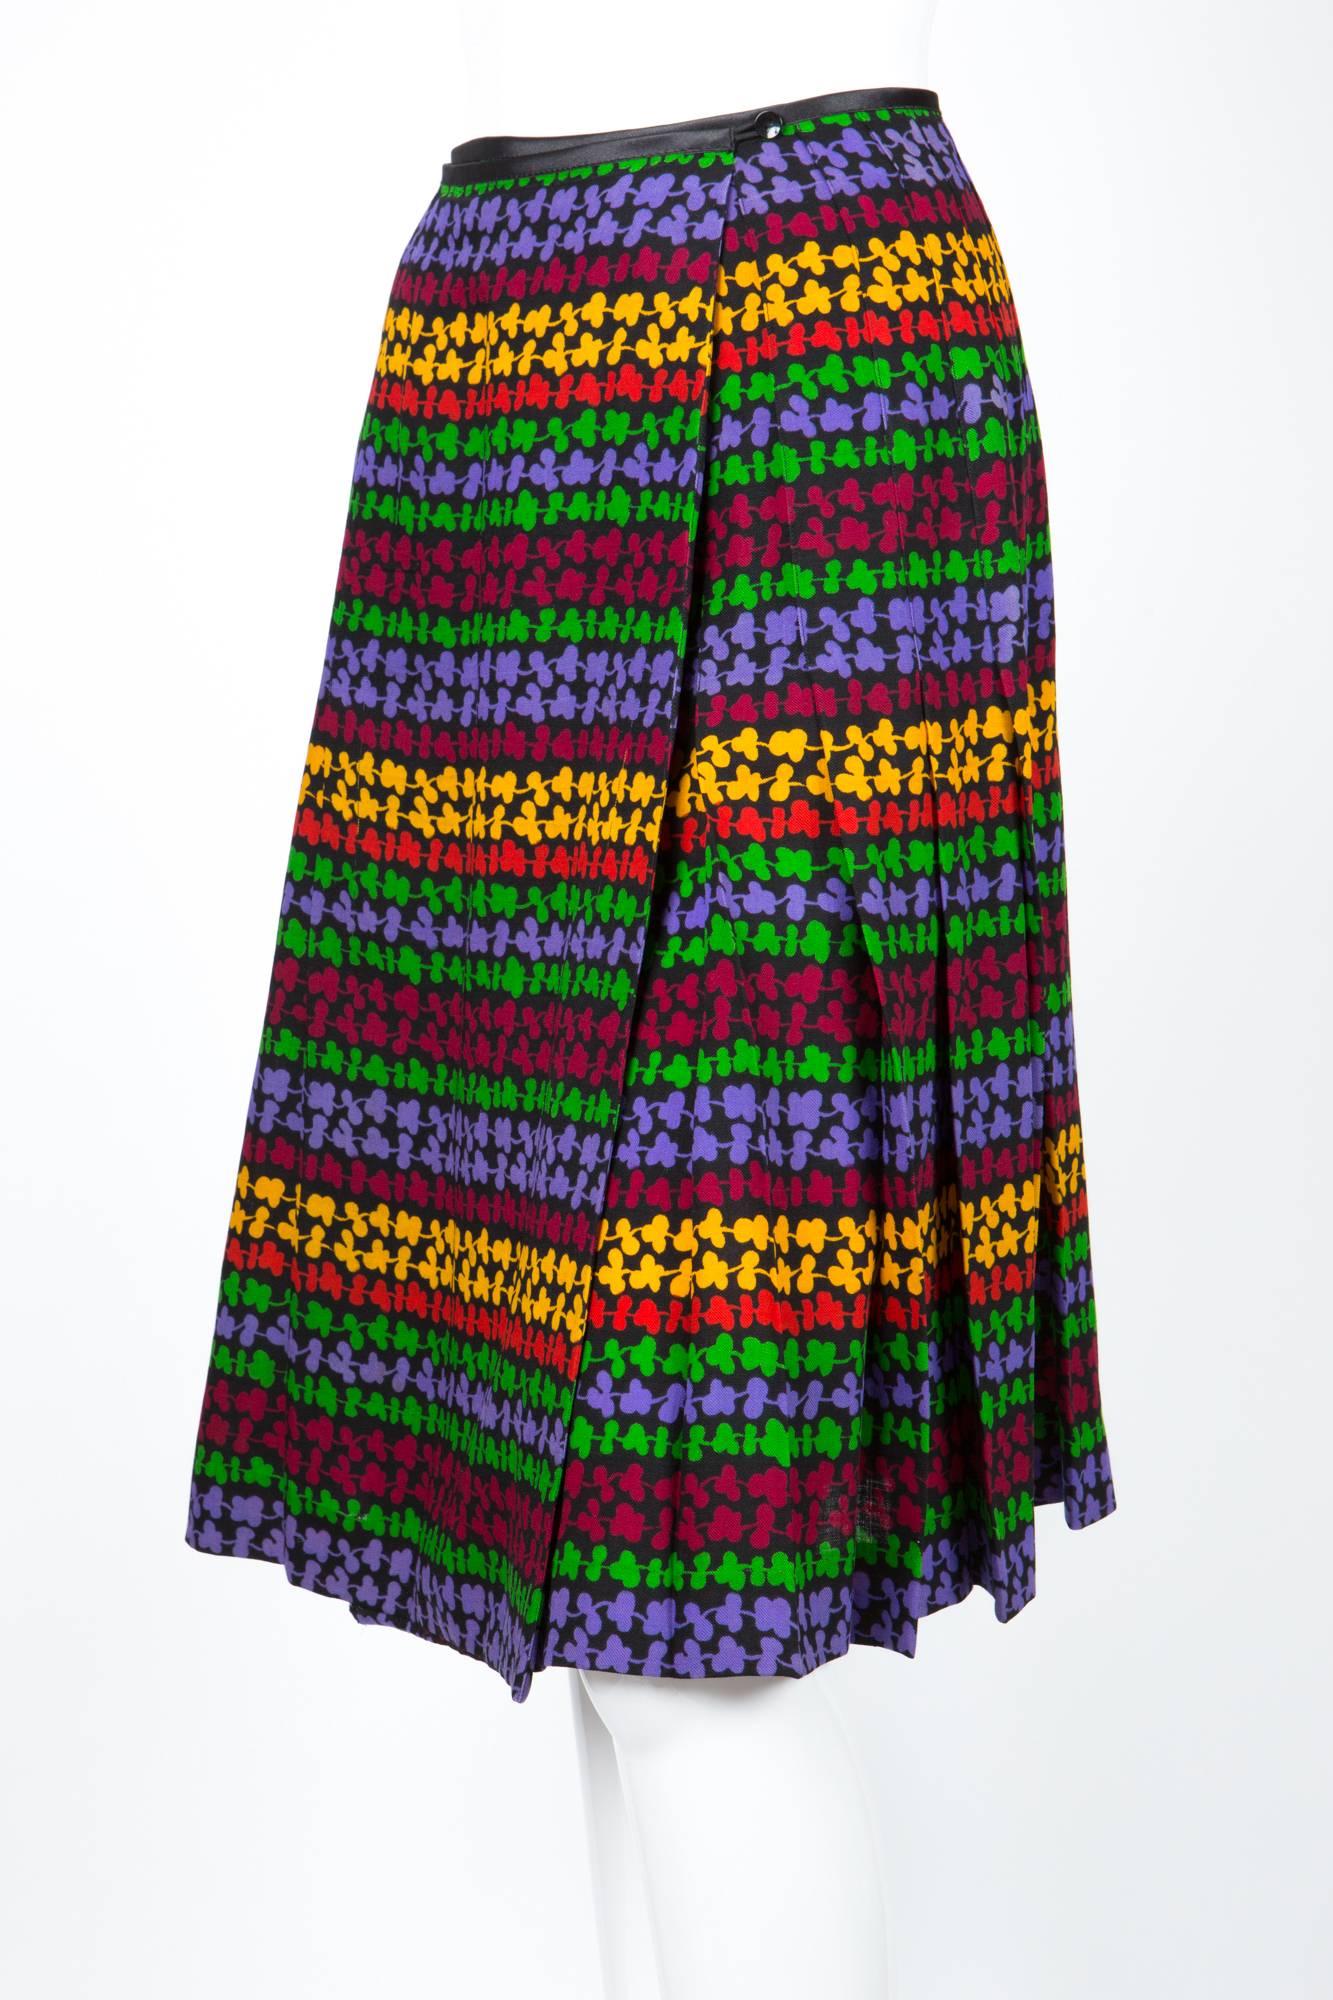 YSL Yves Saint Laurent Multicoloured Wool Skirt In Good Condition For Sale In Paris, FR